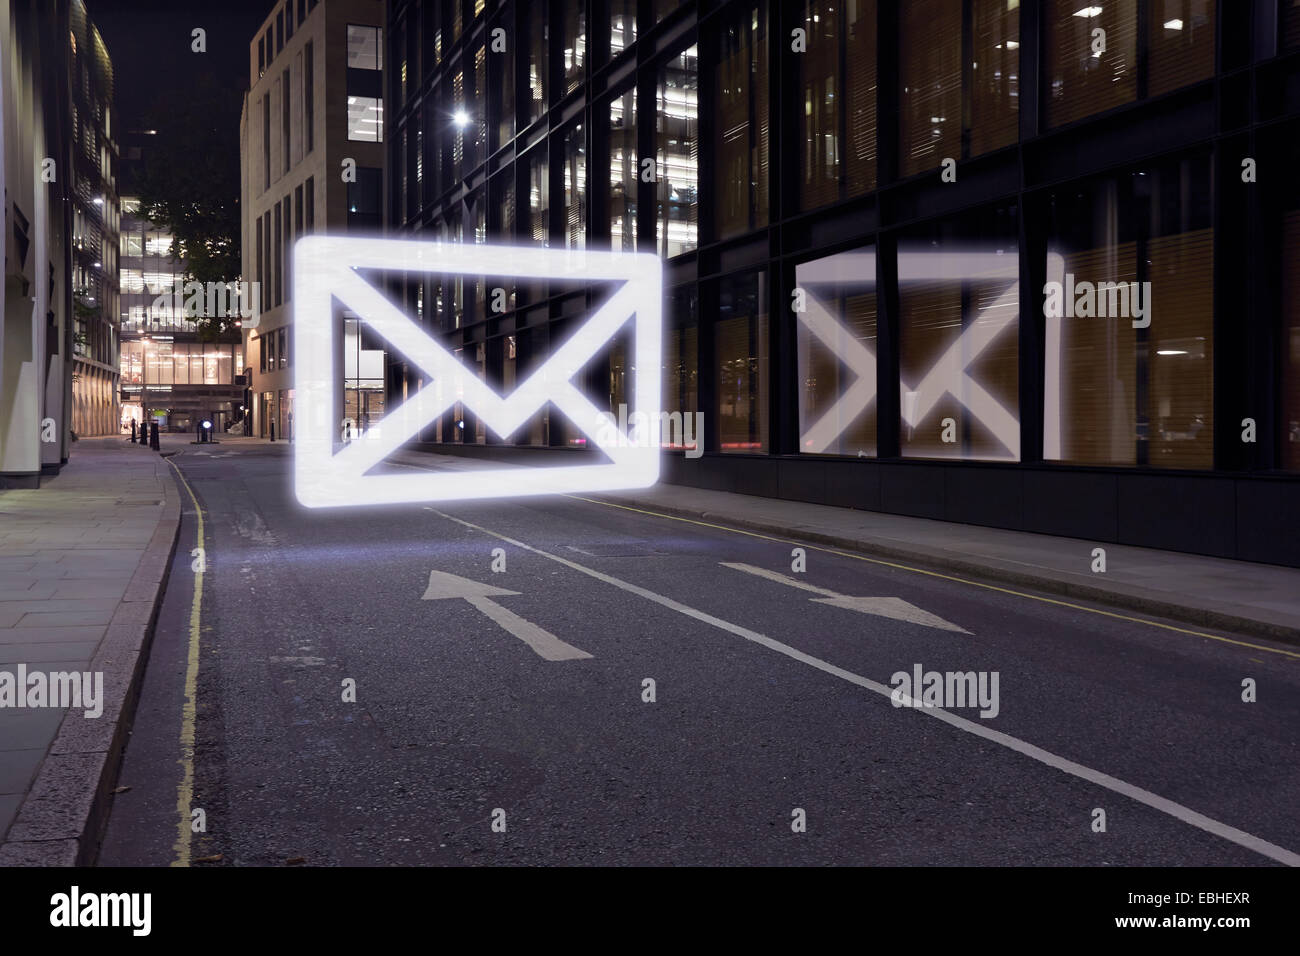 Glowing email icon in street at night, London UK Stock Photo